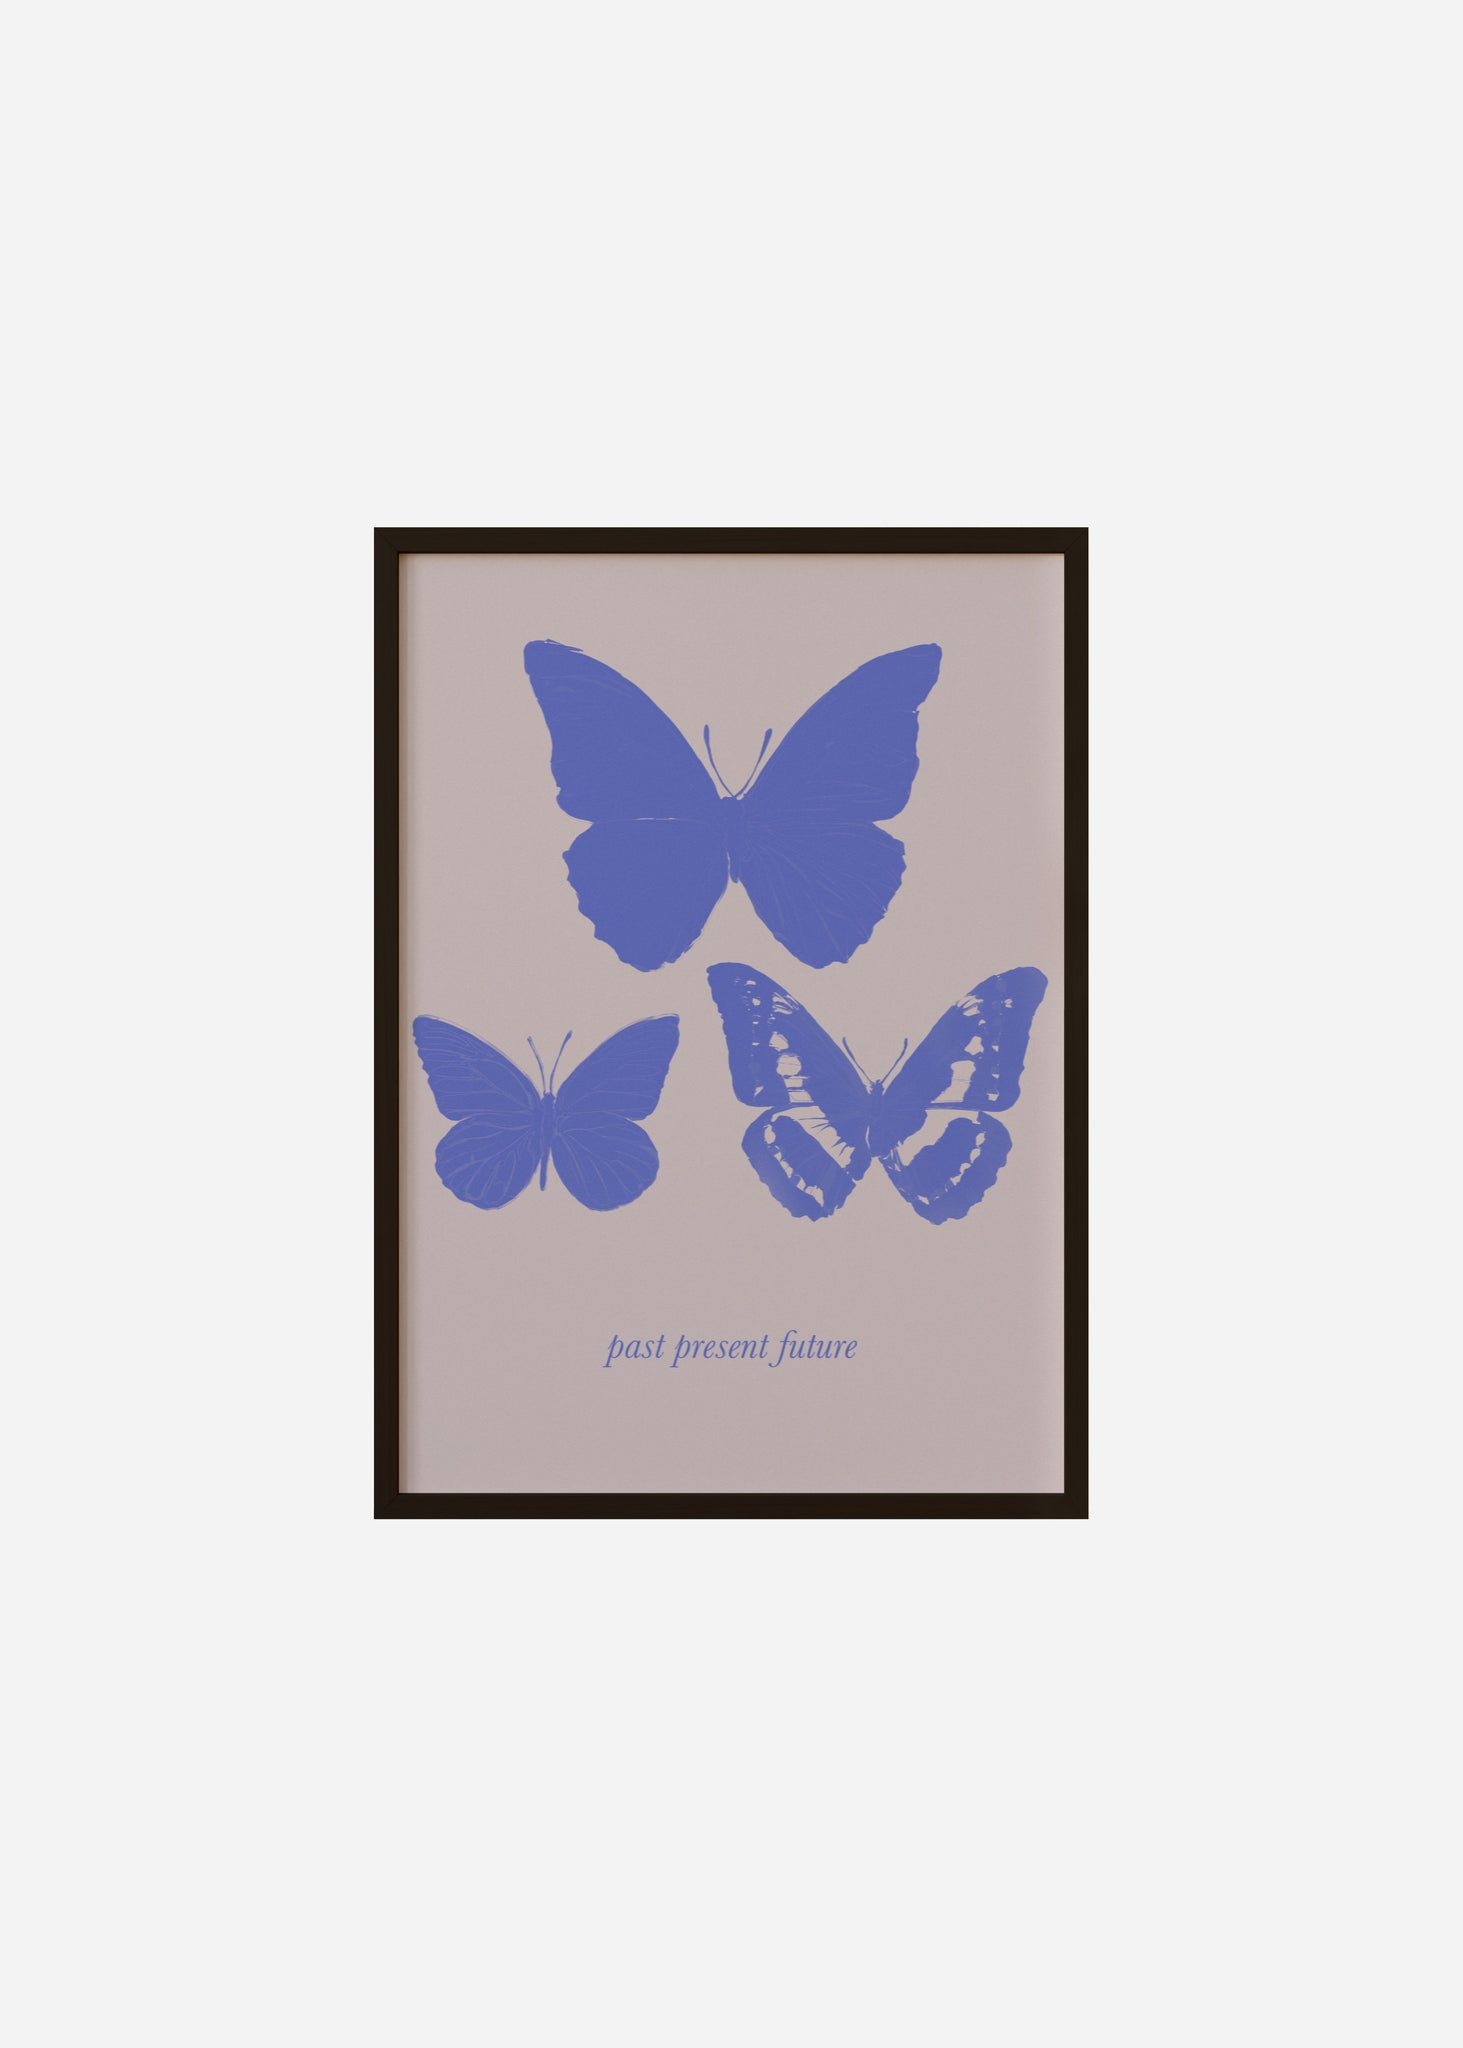 The Butterfly Effect / Past Present Future Framed Print